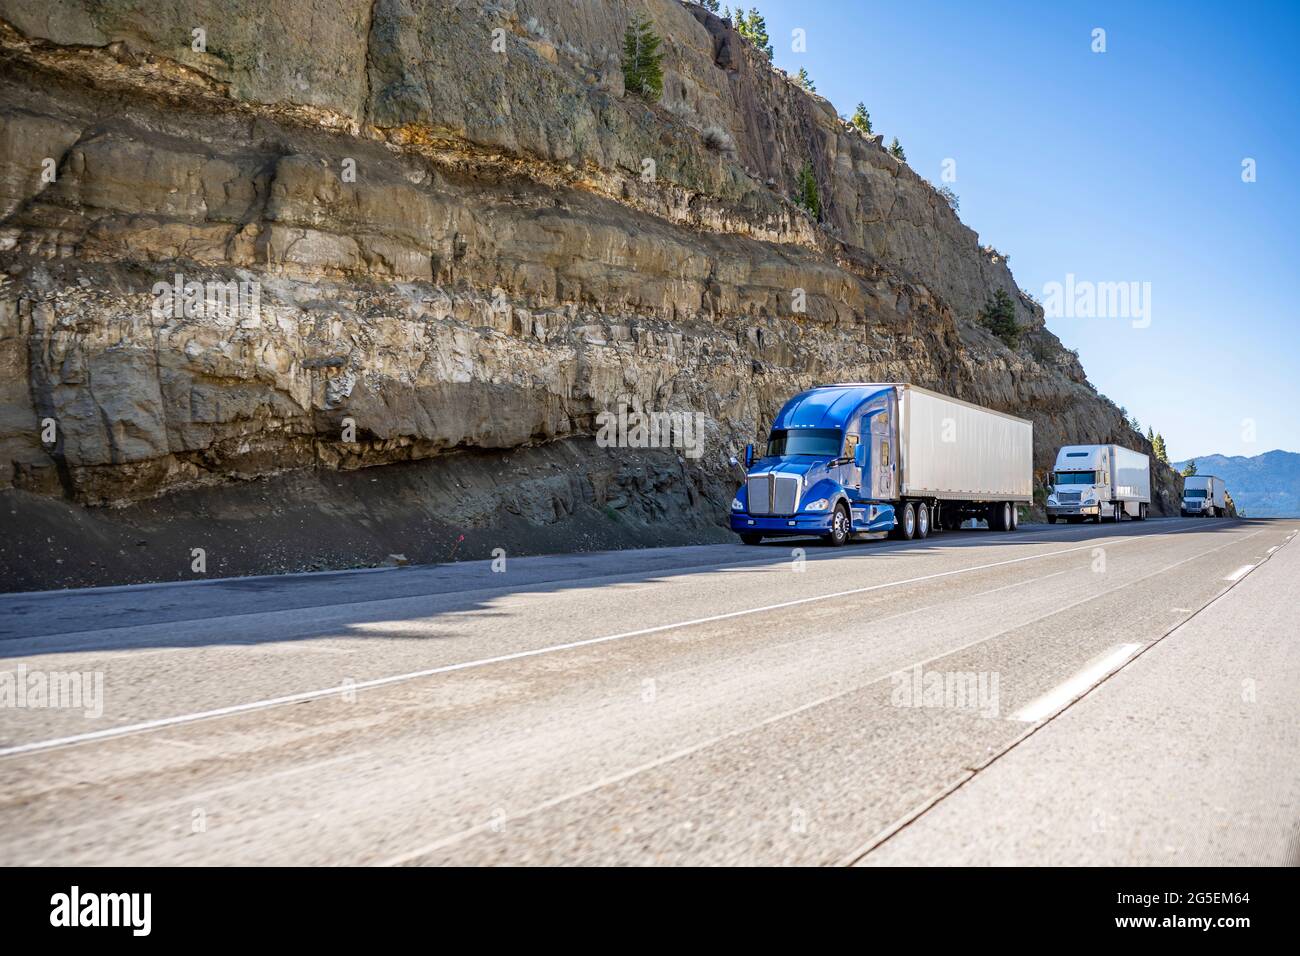 Group of big rigs semi trucks tractors transporting cargo in different semi trailers standing off road in a line near a stone cliff take a break at th Stock Photo